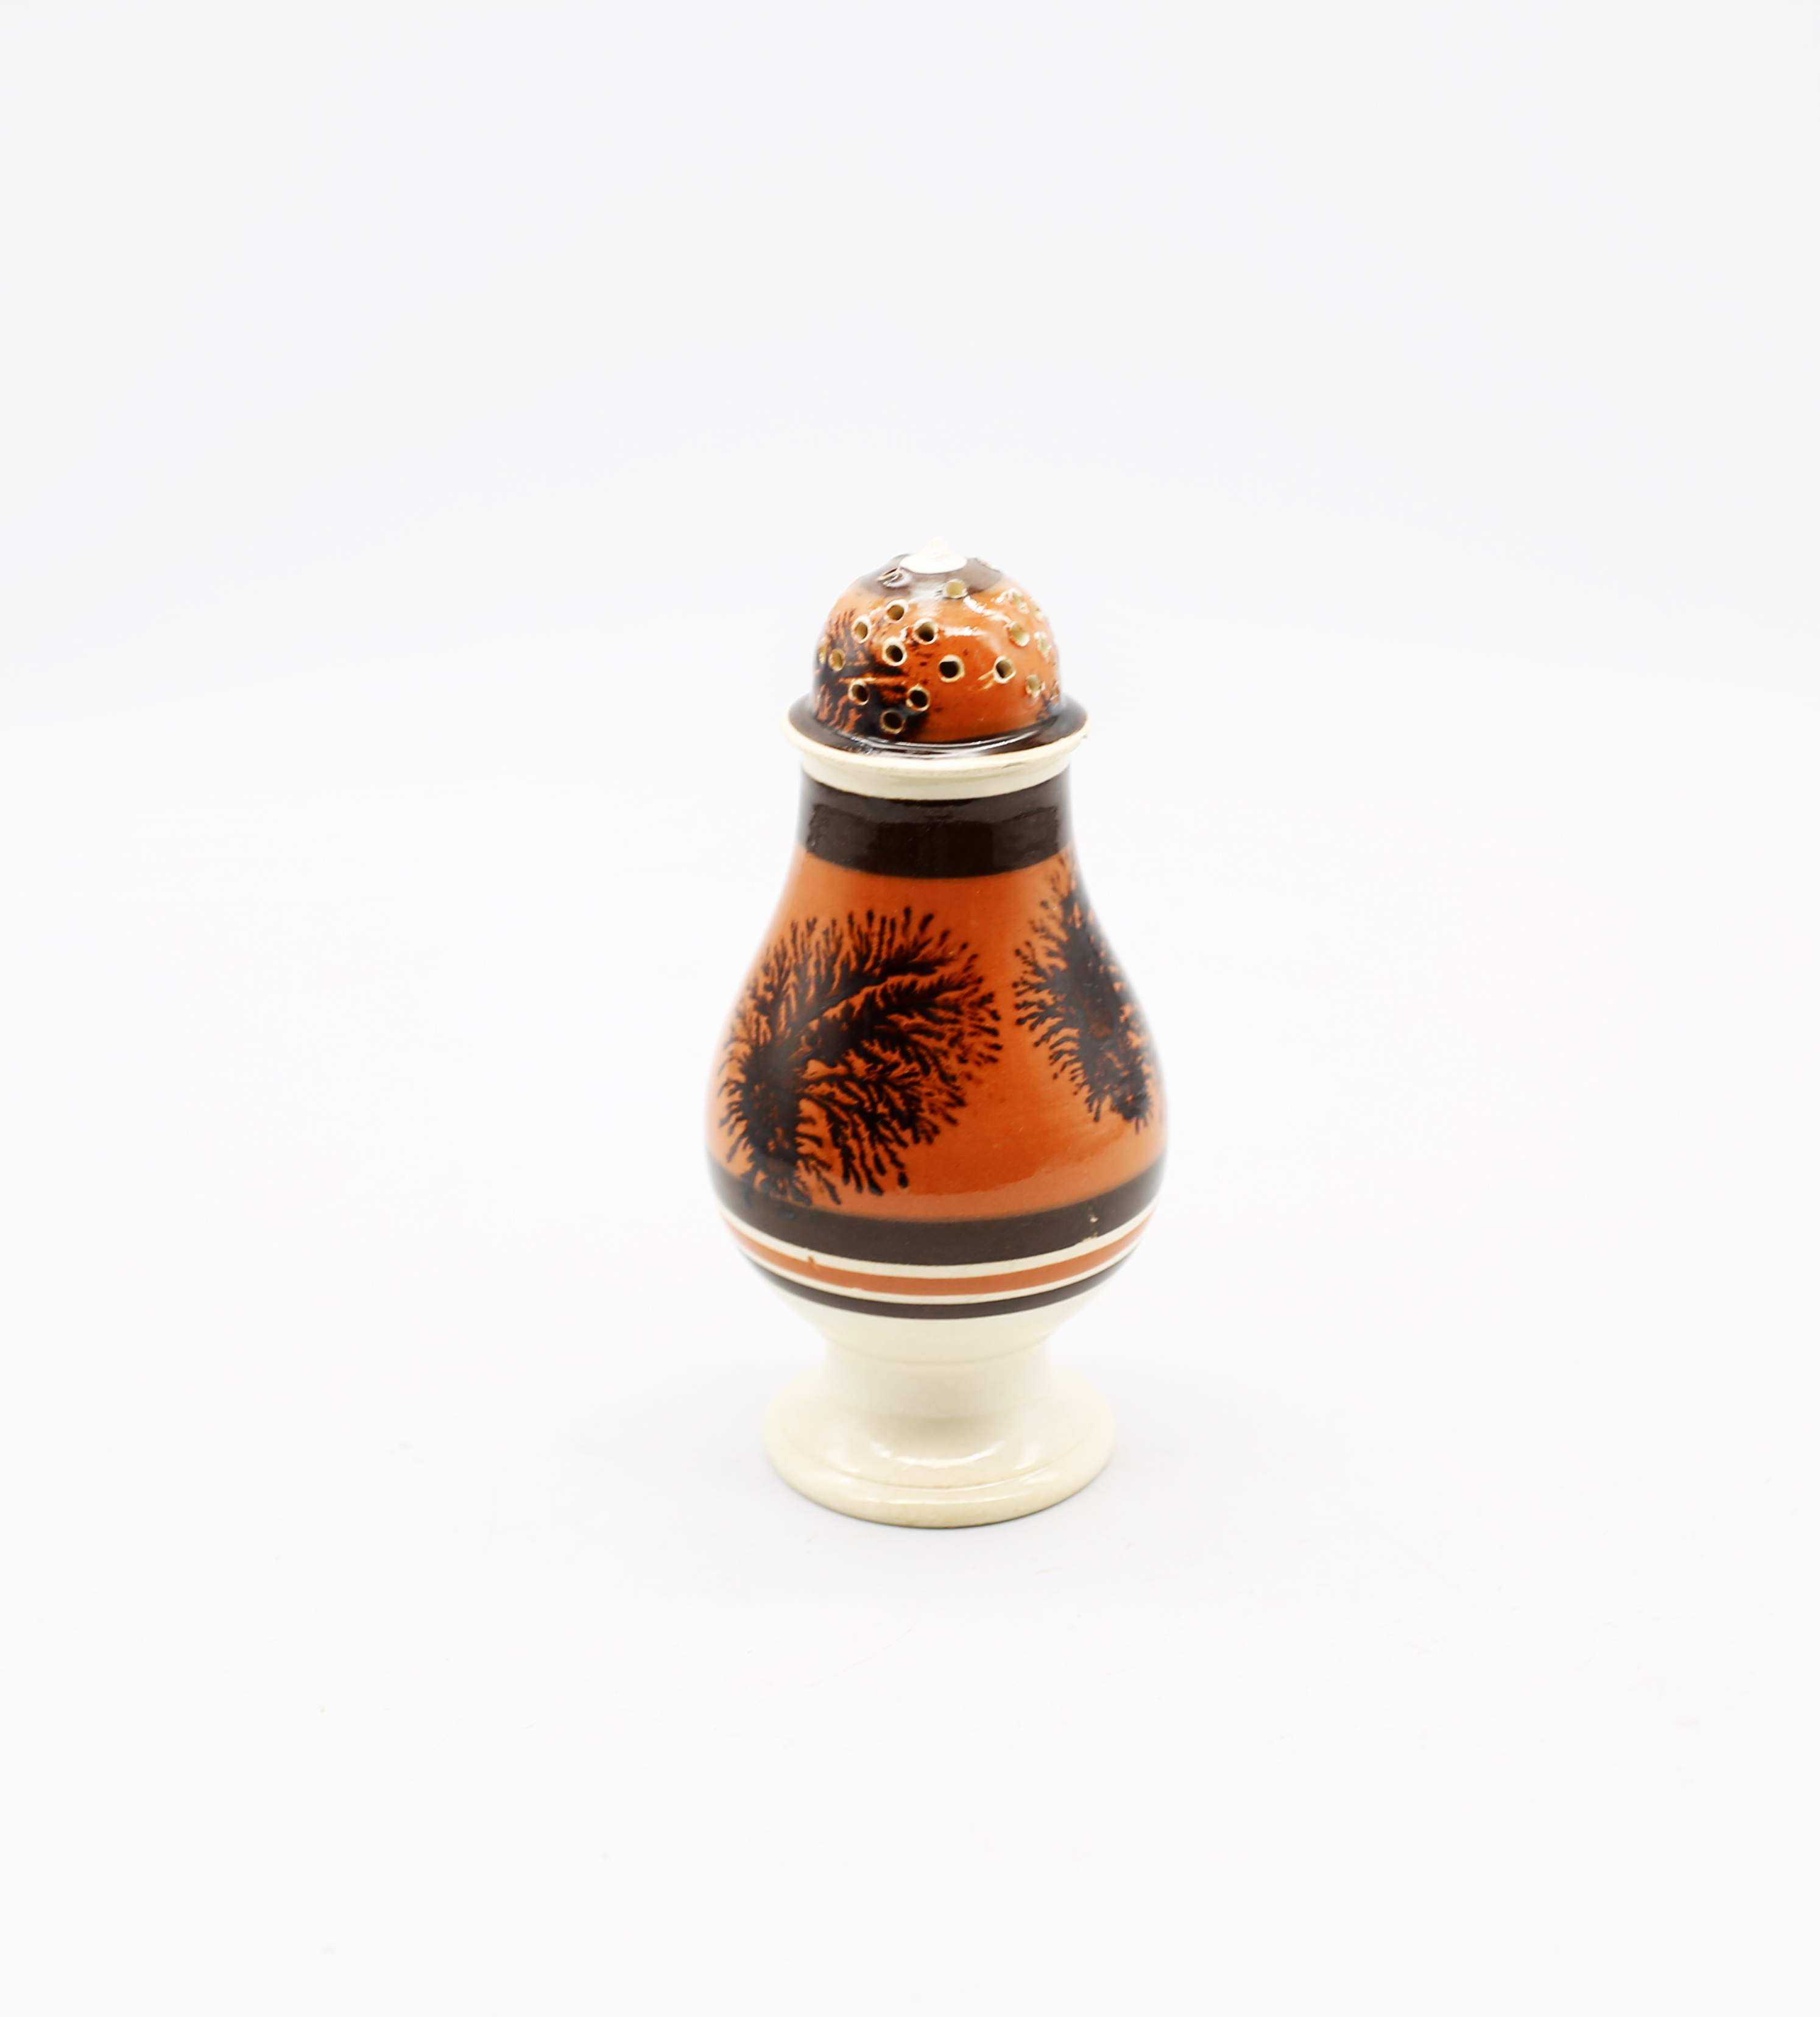 A creamware Mocha caster, dark orange ground, with brown feathered trees and bands.  Circa 1800-